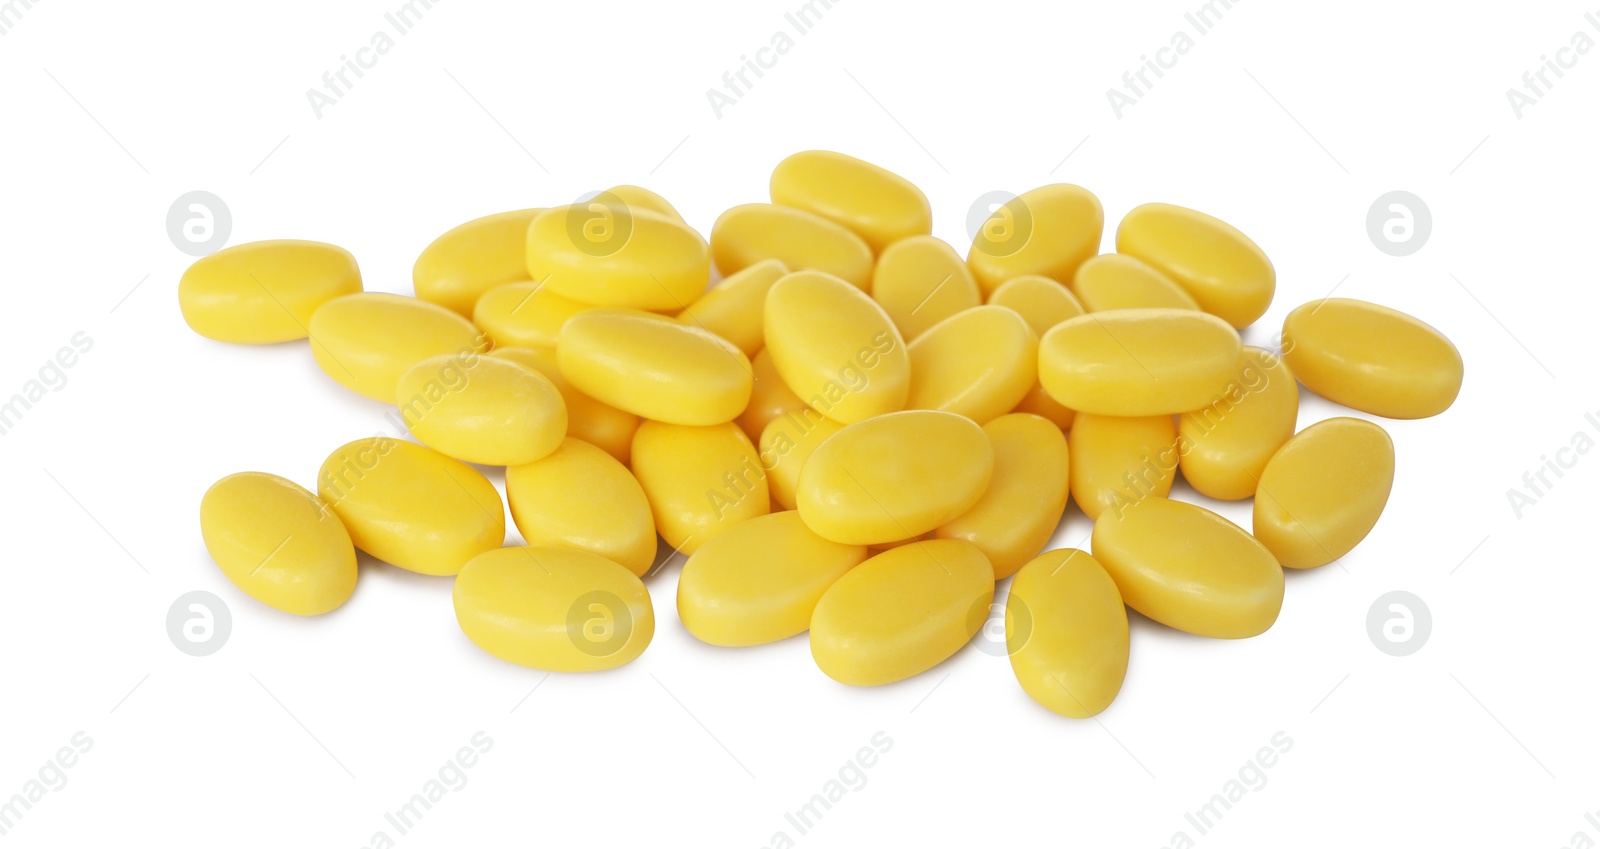 Photo of Tasty yellow dragee candies on white background